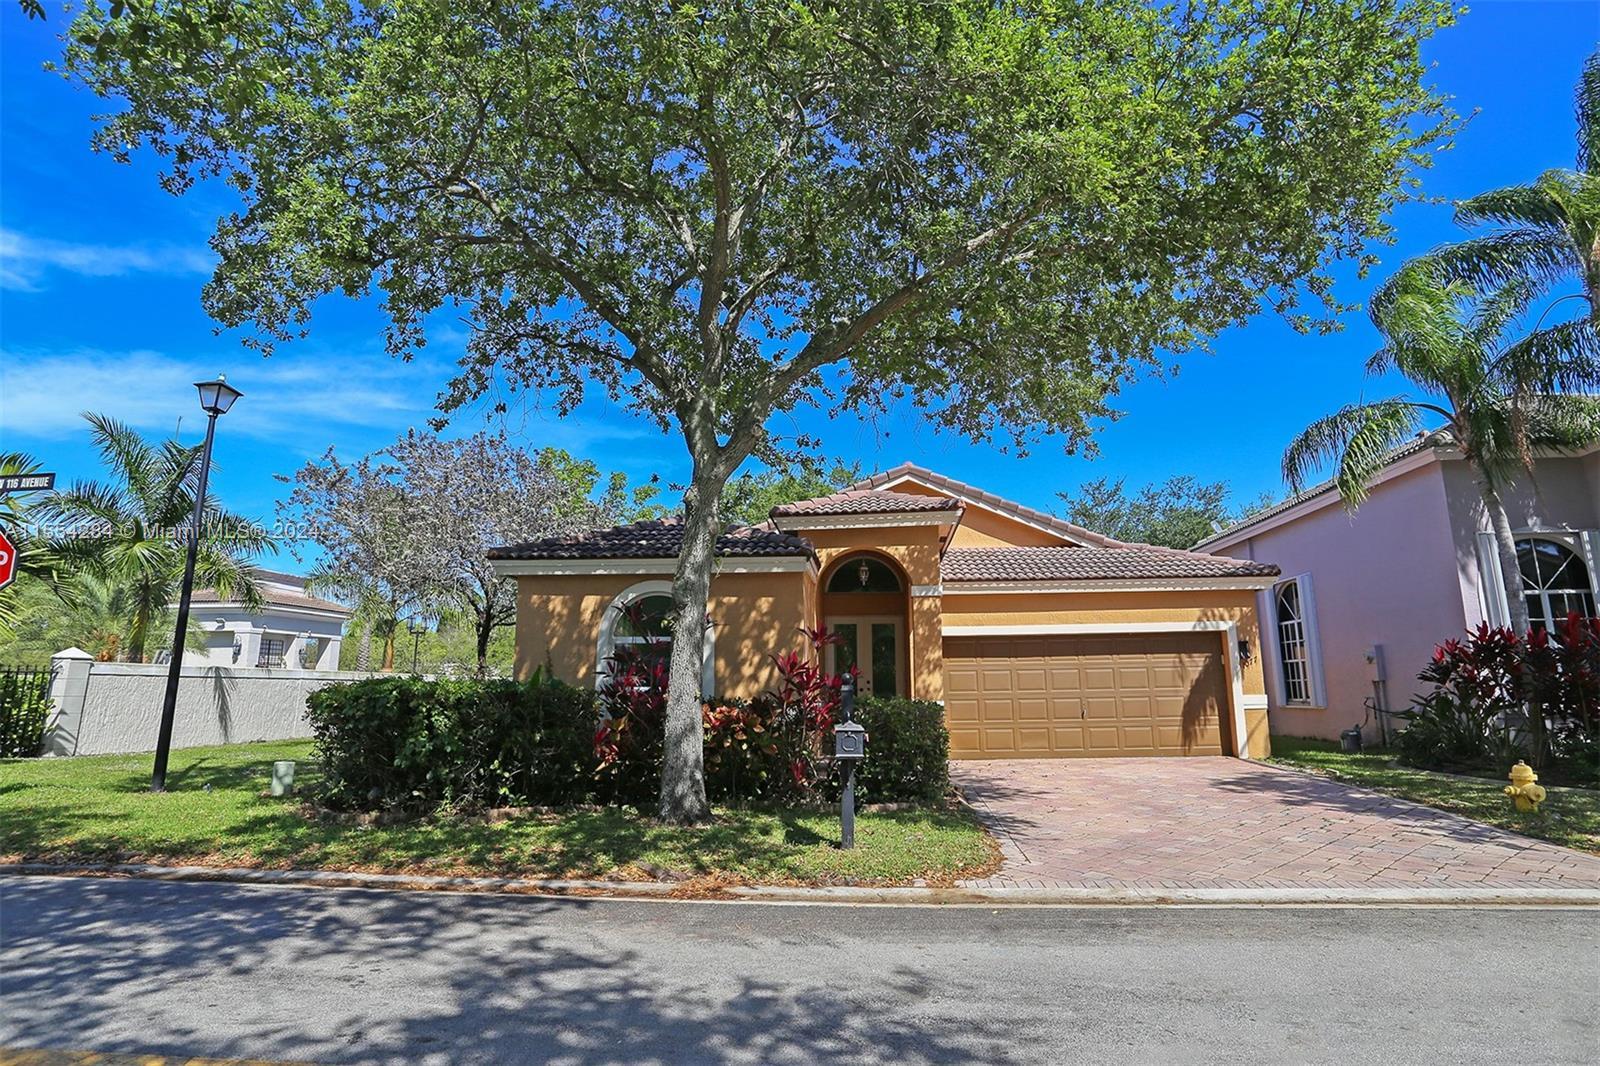 Photo of 1077 NW 116th Ave in Coral Springs, FL